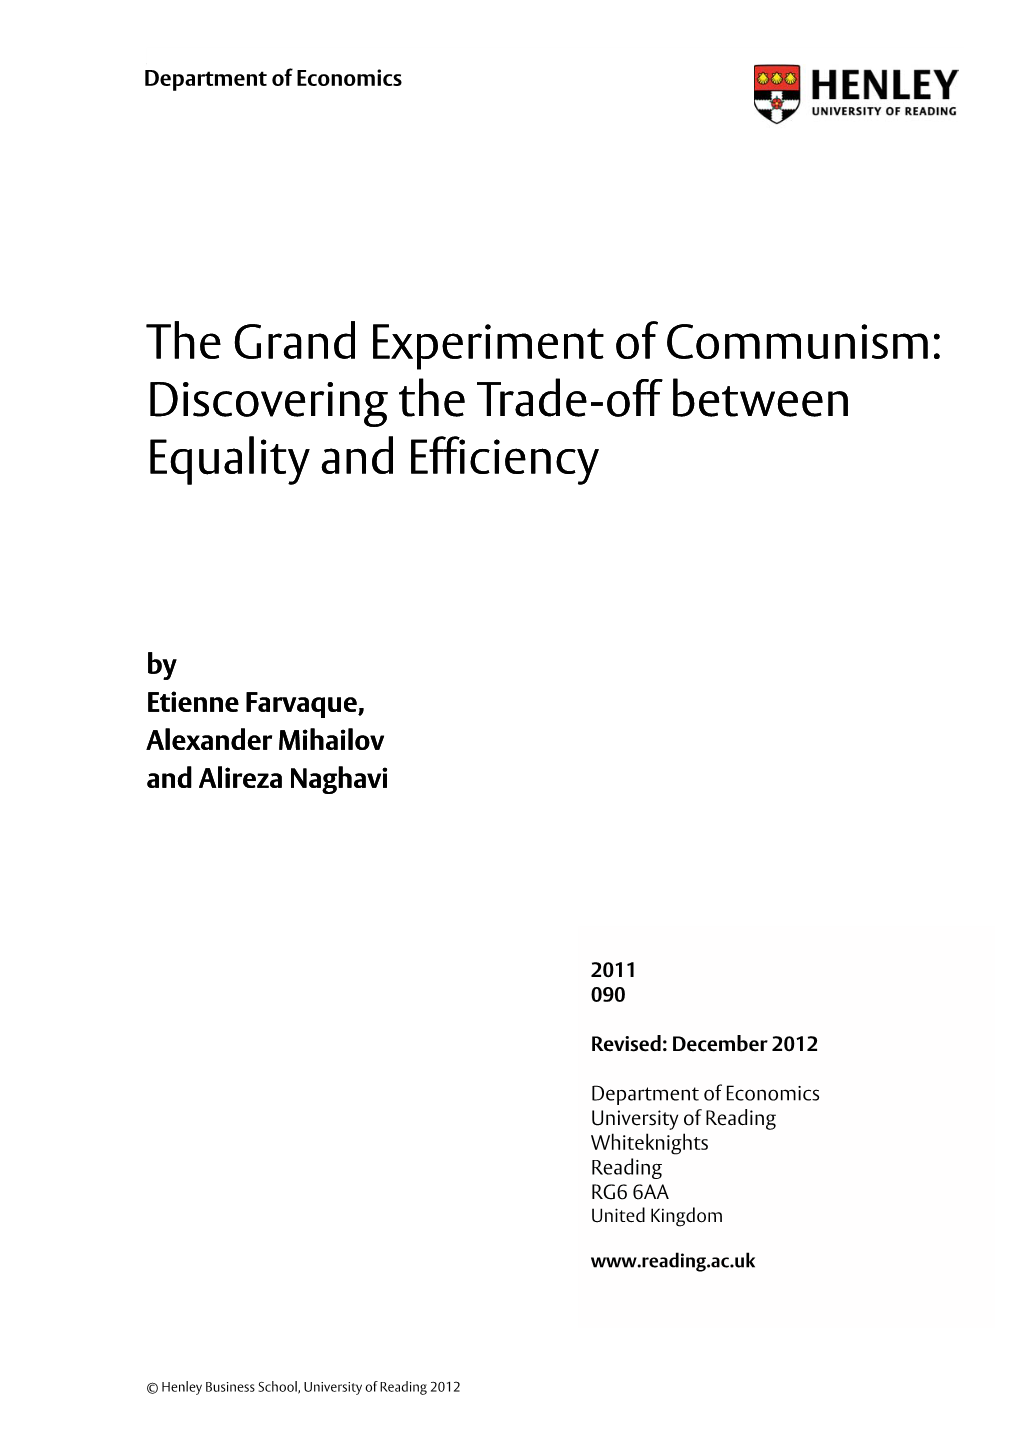 The Grand Experiment of Communism: Discovering the Trade-Off Between Equality and Efficiency